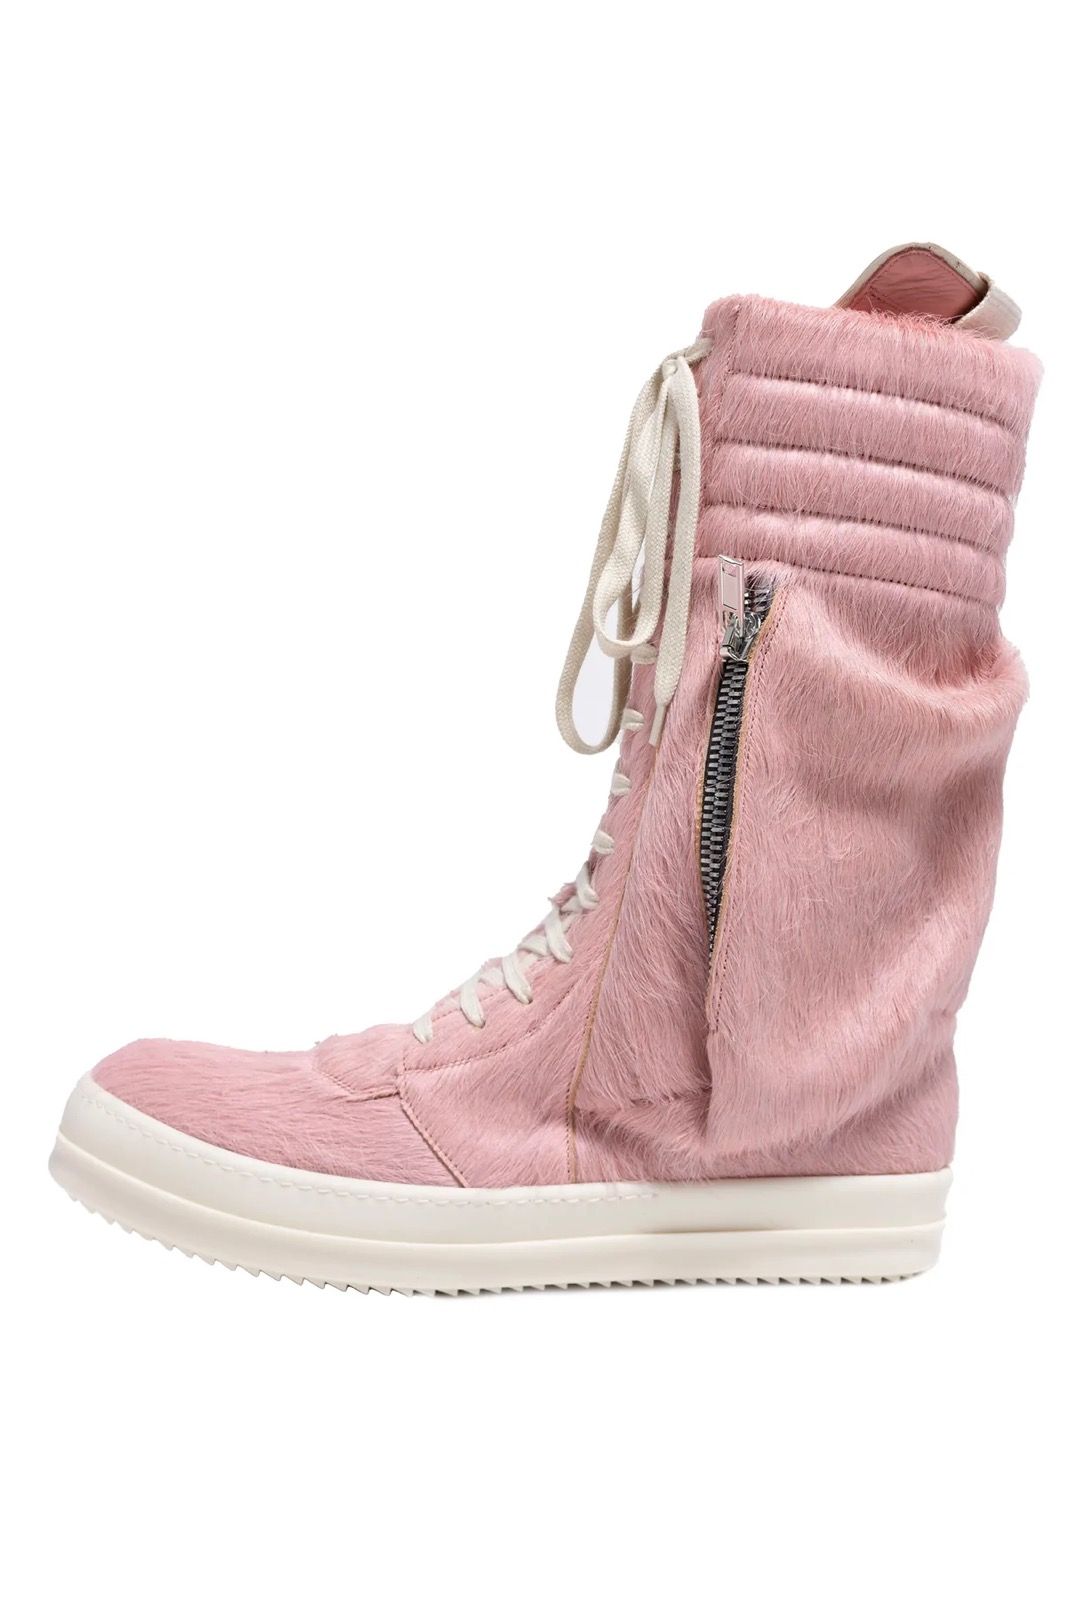 Pre-owned Rick Owens Fw22 Strobe Cargobasket Dirty Pink Long Hair Pony Shoes